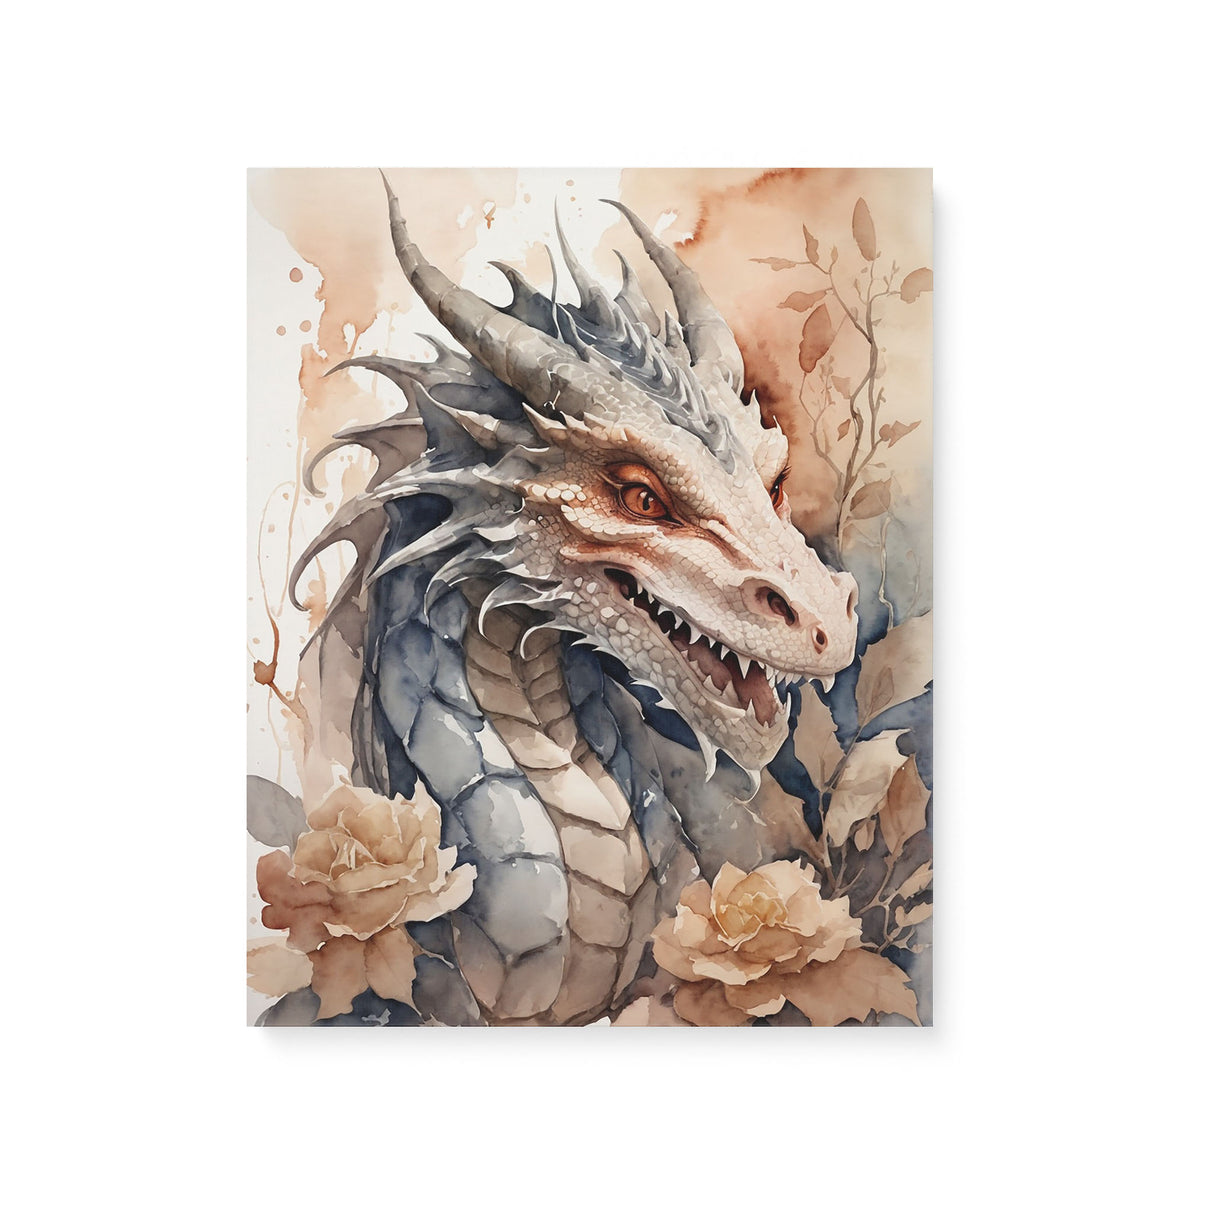 Mythical Medieval Watercolor Wall Art Canvas {World of Dragon} Canvas Wall Art Sckribbles 16x20  